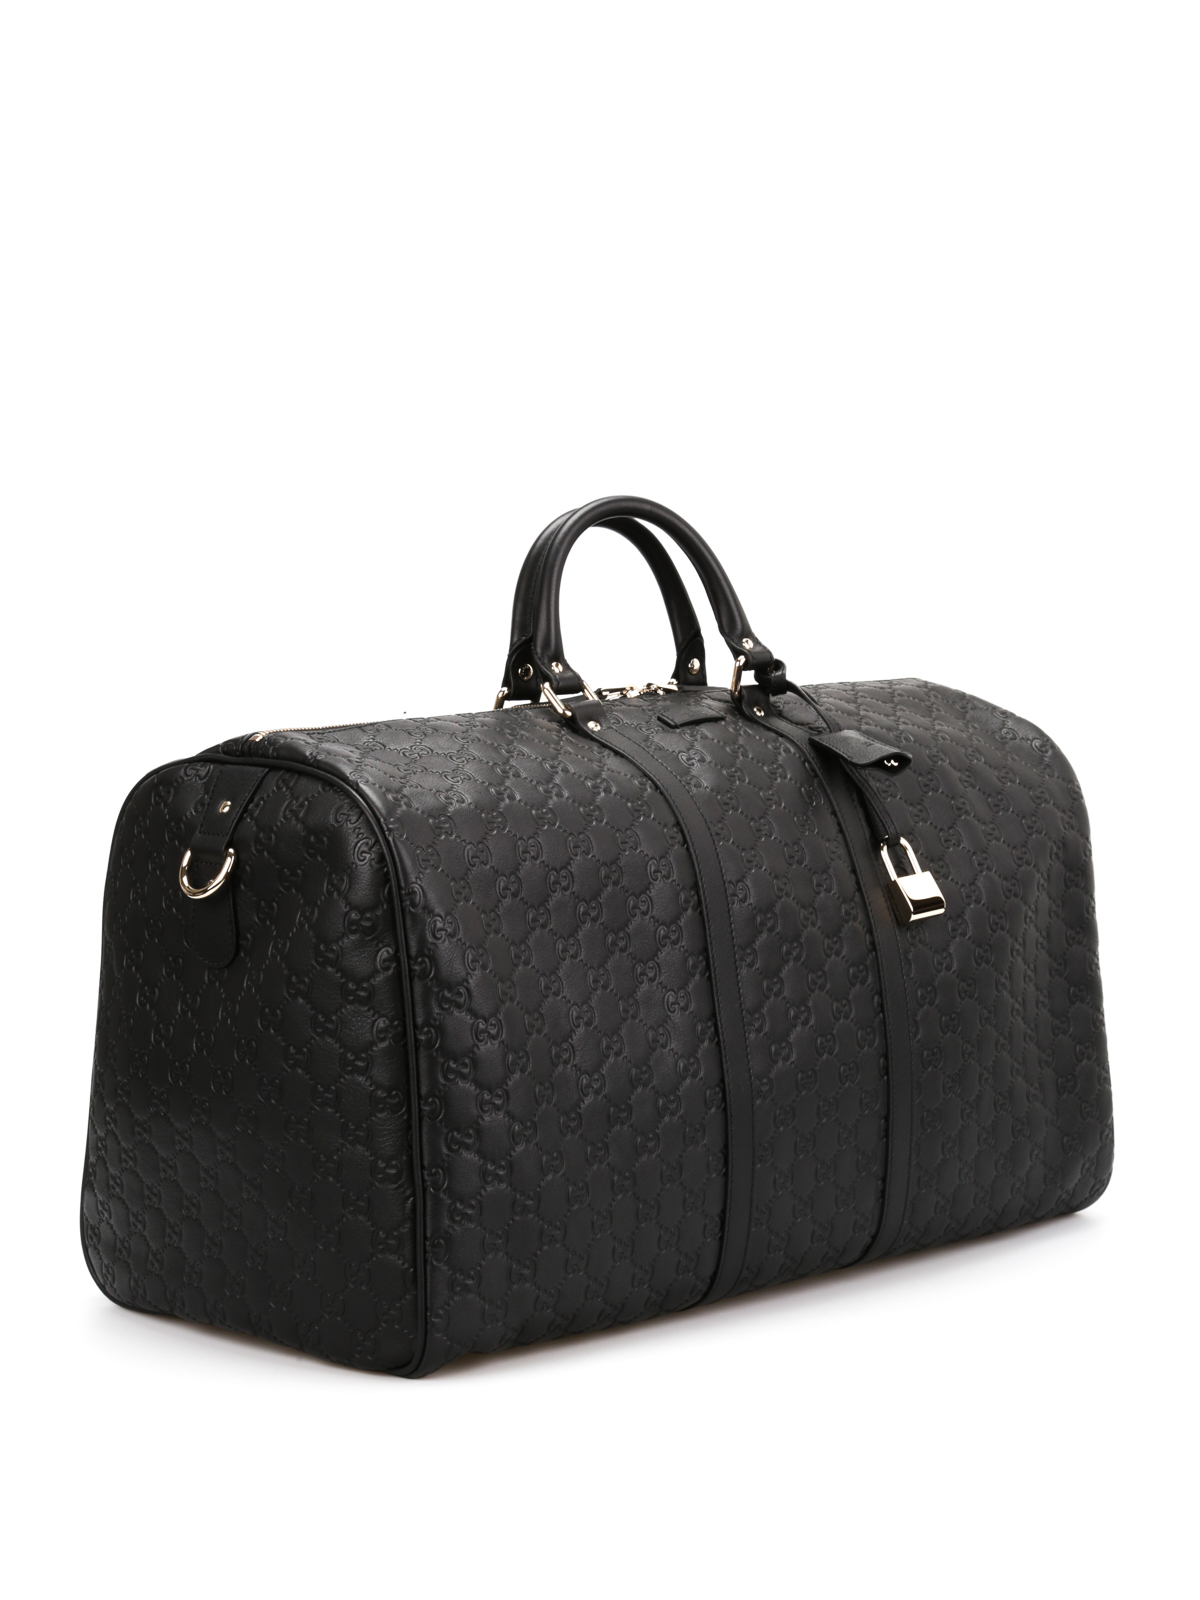 Gucci - Carry on duffle bag - Luggage 